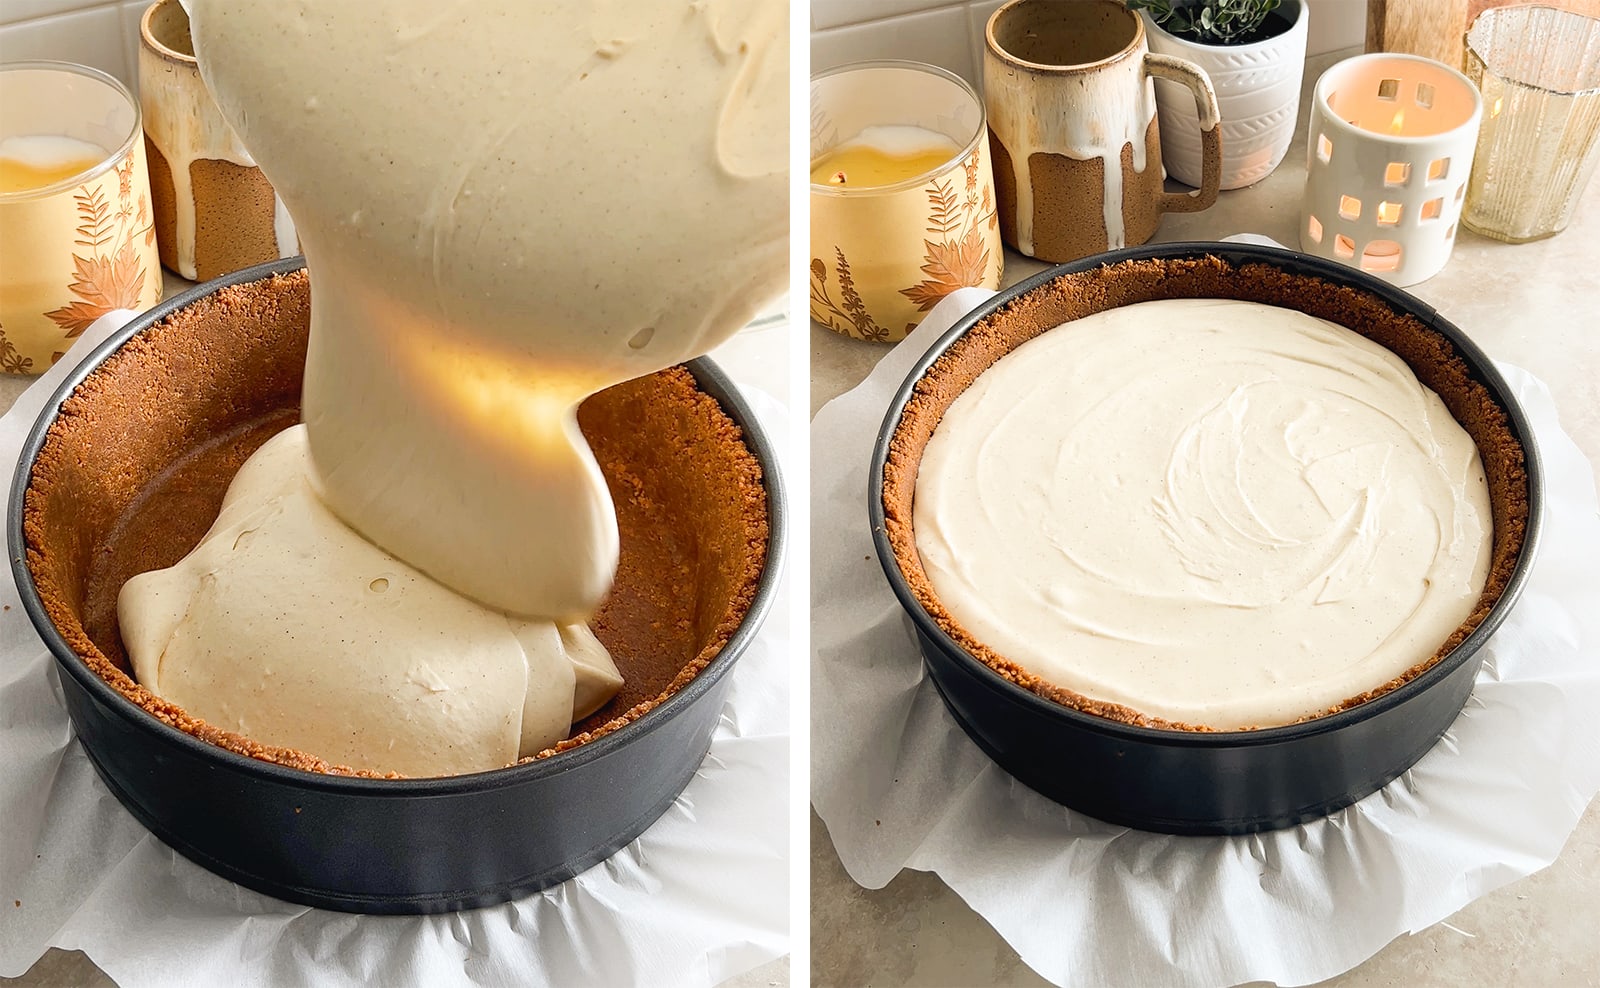 Left to right: pouring cheesecake batter into crust, pan filled with cheesecake and biscoff crust.